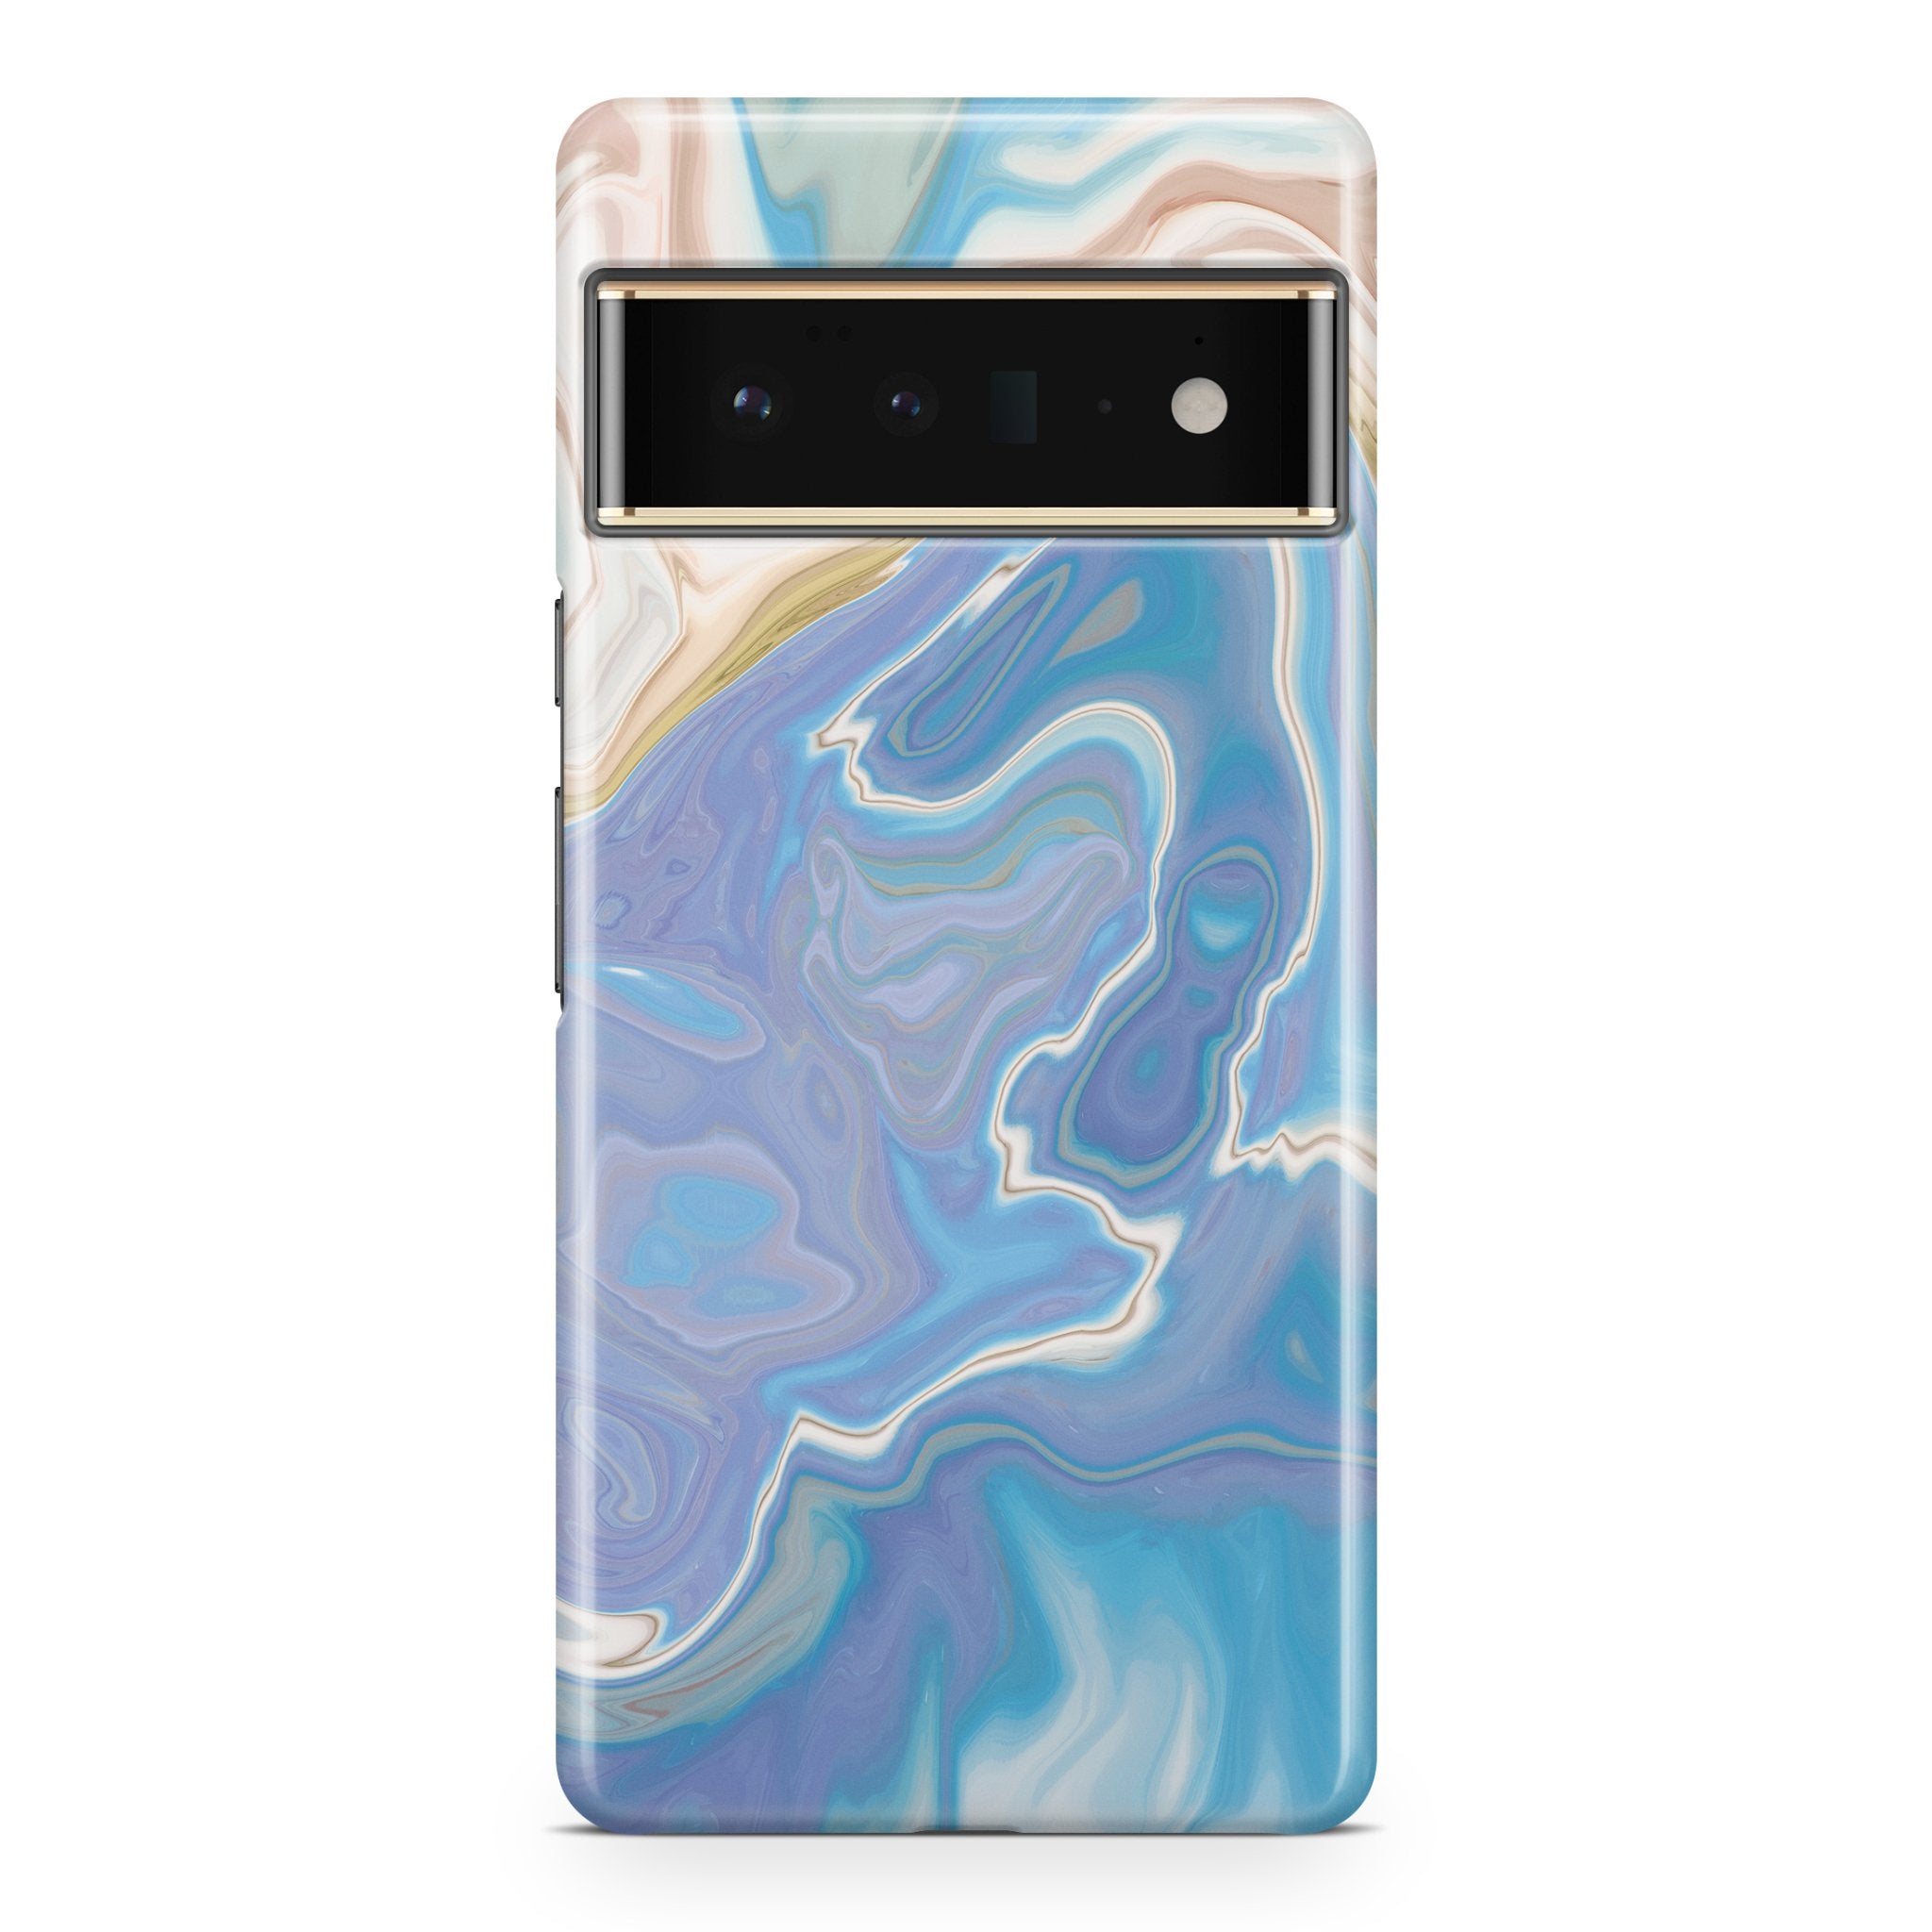 Purple Turquoise Agate - Google phone case designs by CaseSwagger